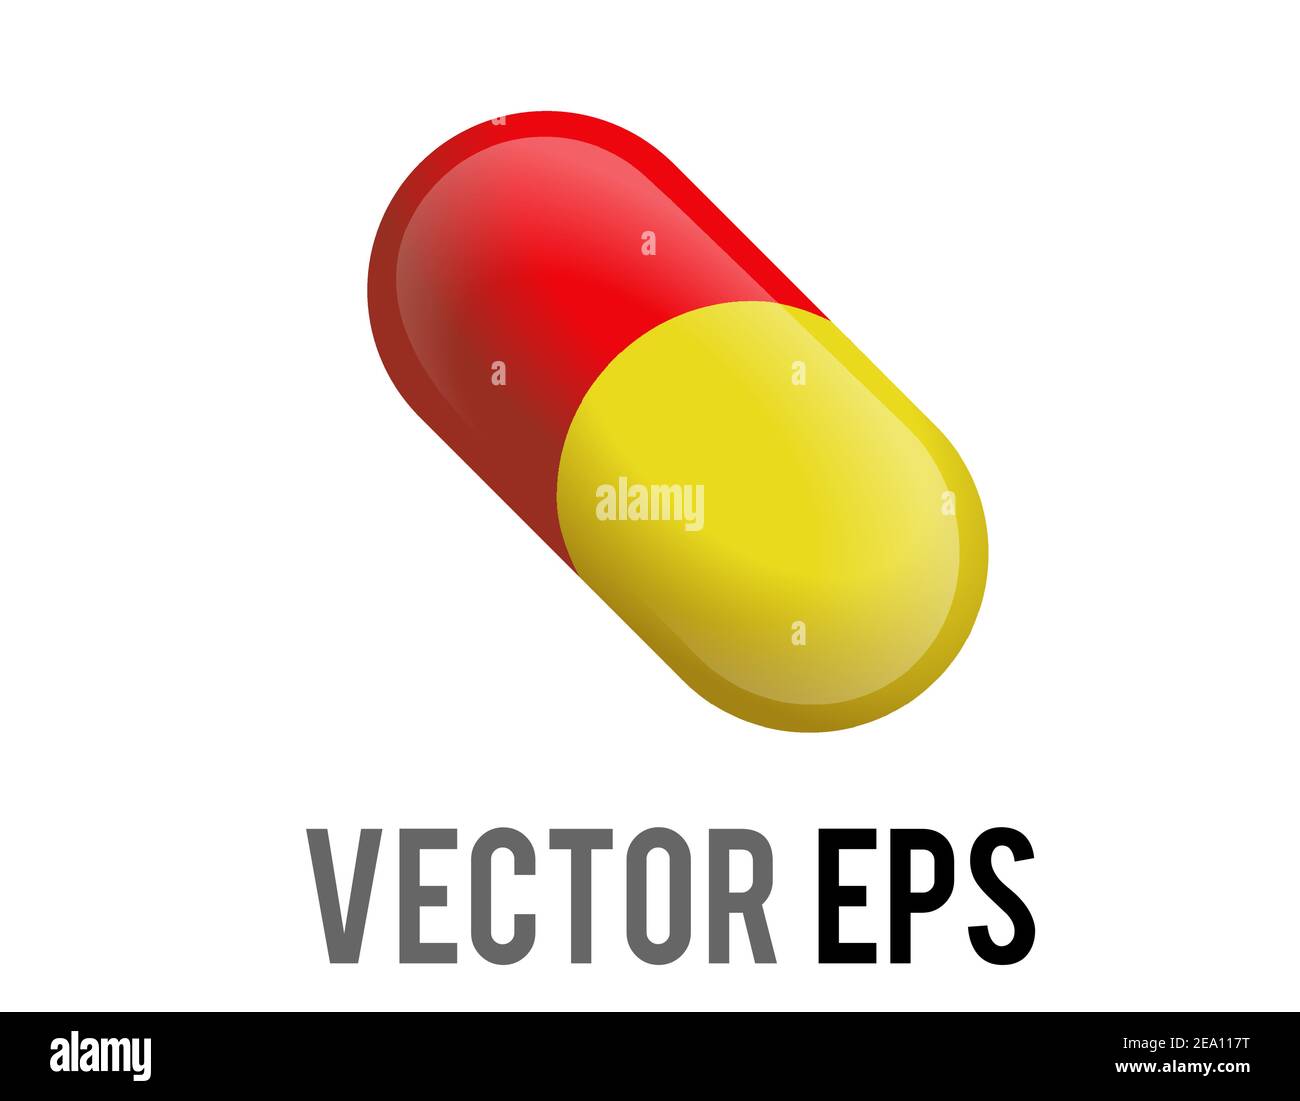 The isolated vector half red half yellow capsule of medical pill icon, used for content concerning health, medicine and related professions types of d Stock Vector